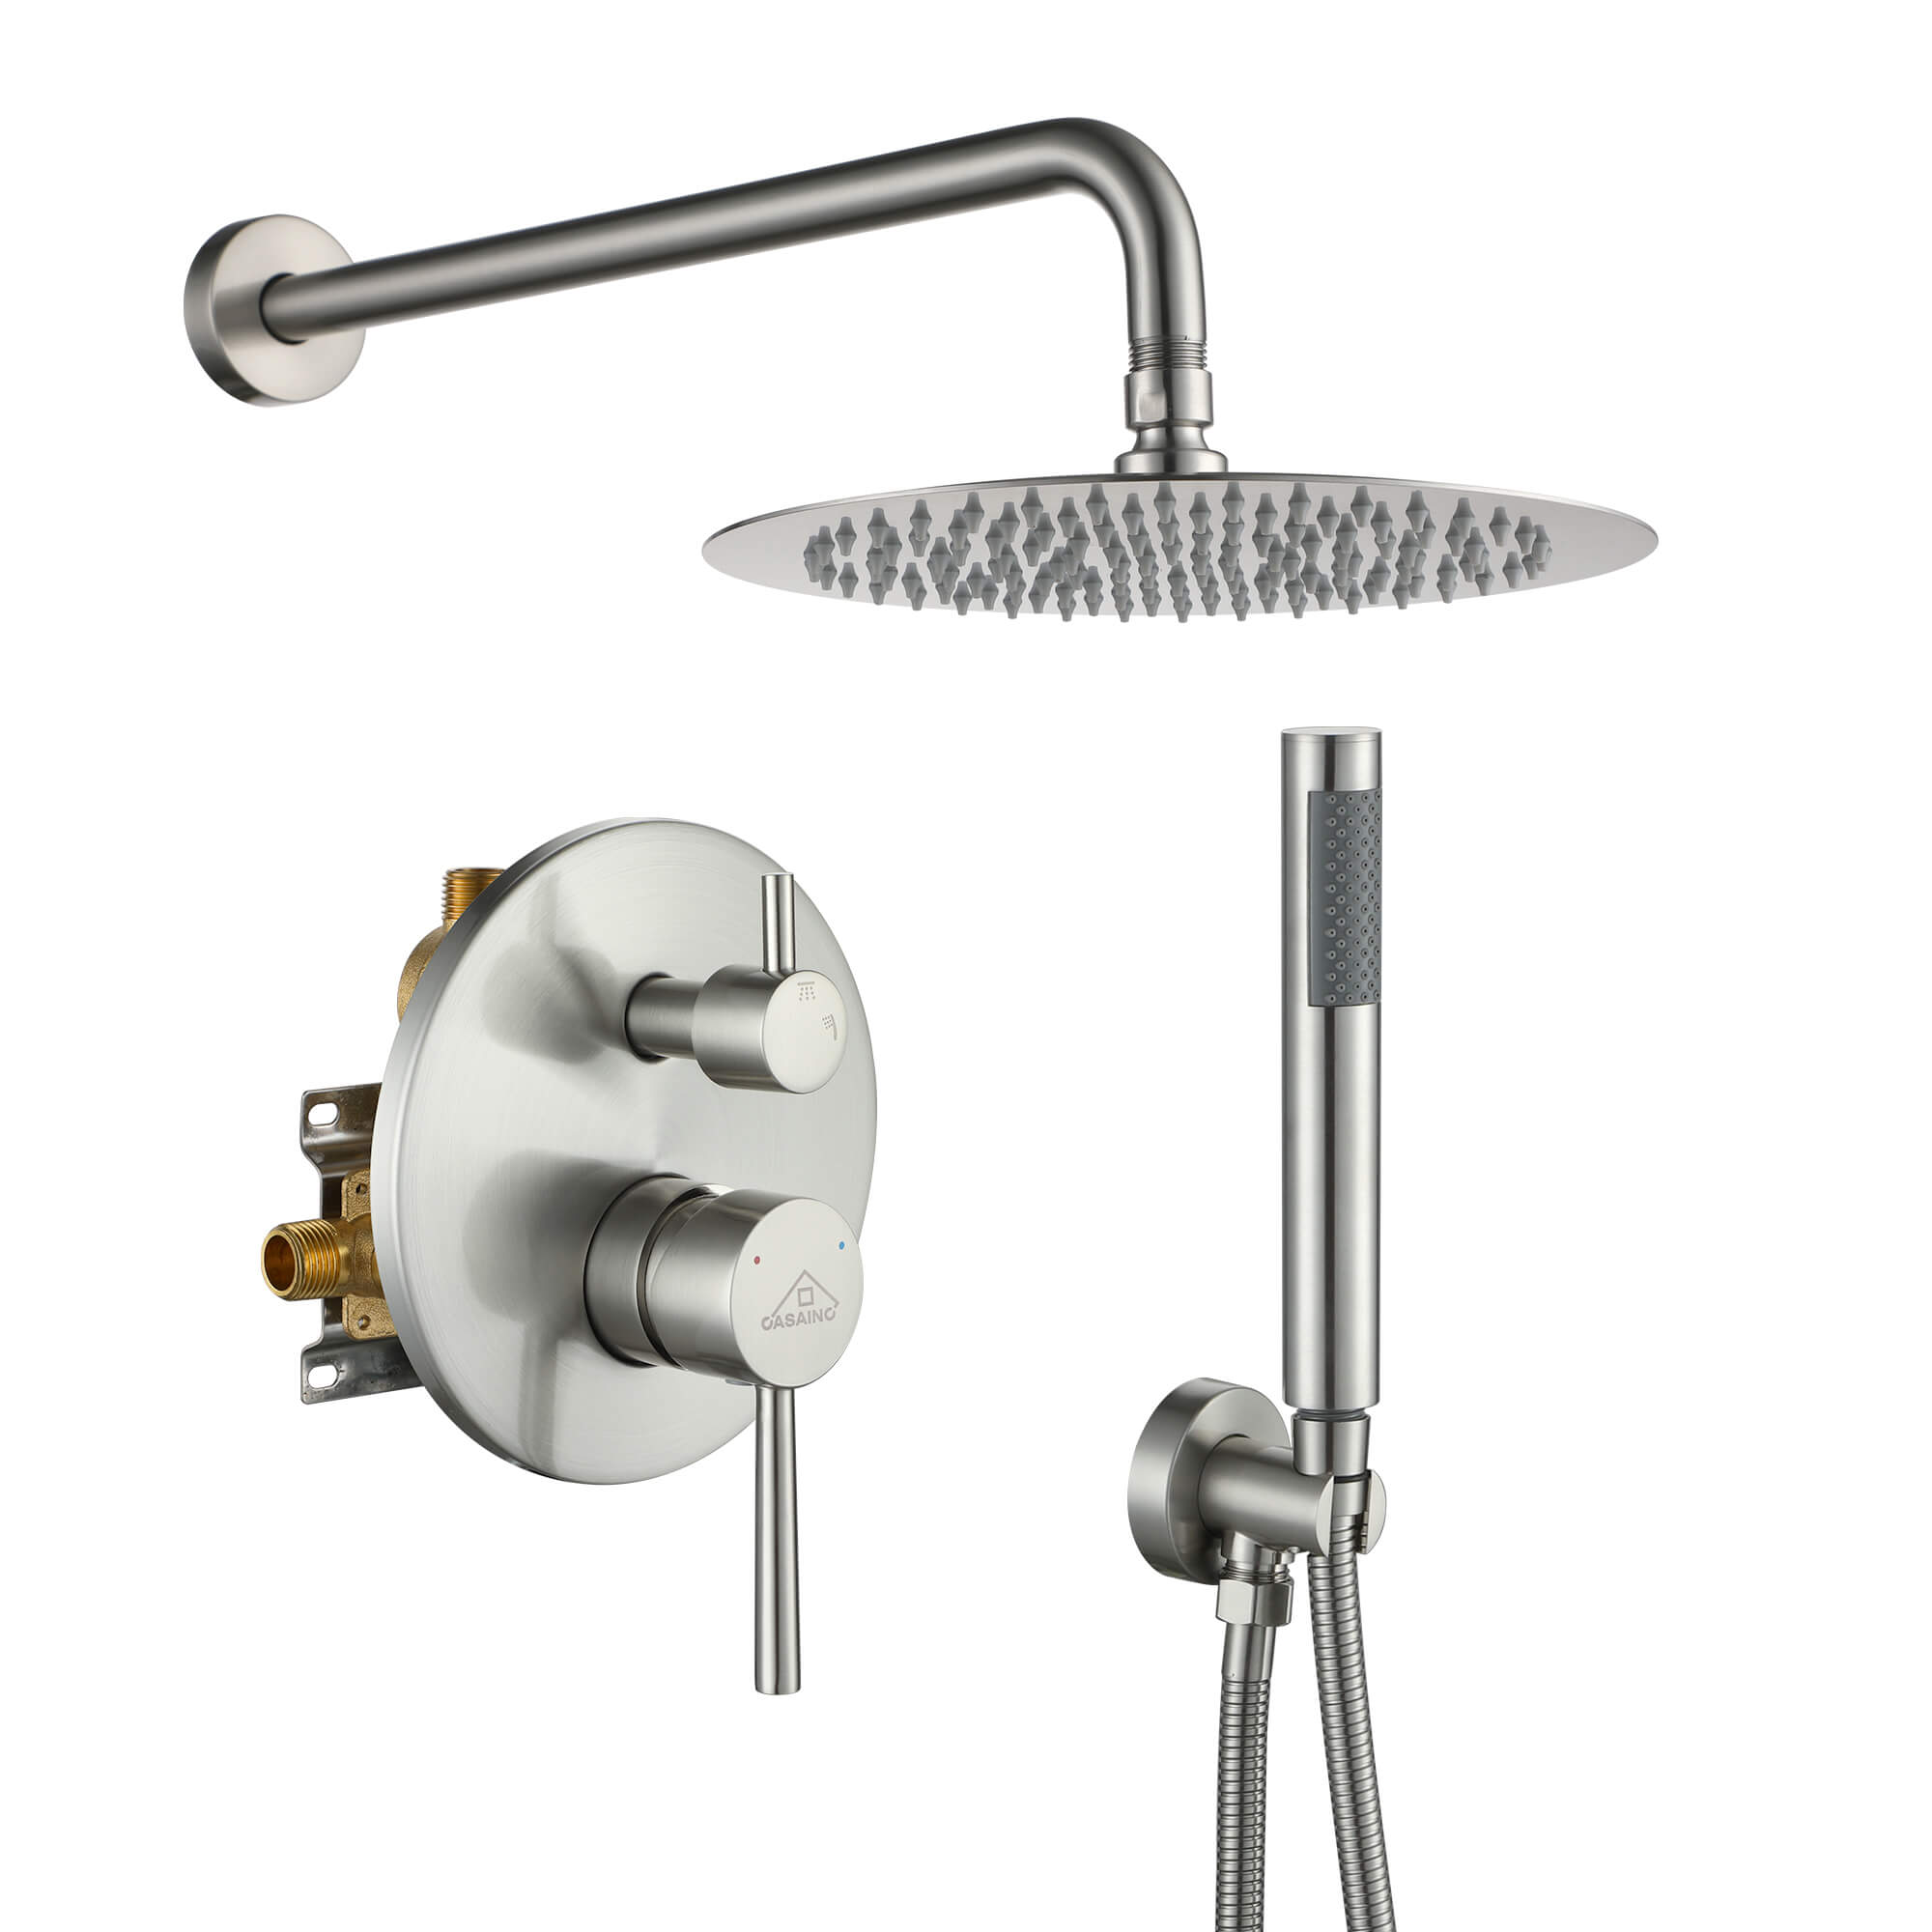 Casainc Brushed Nickel 2-Function Built-in Shower System with Handheld Shower